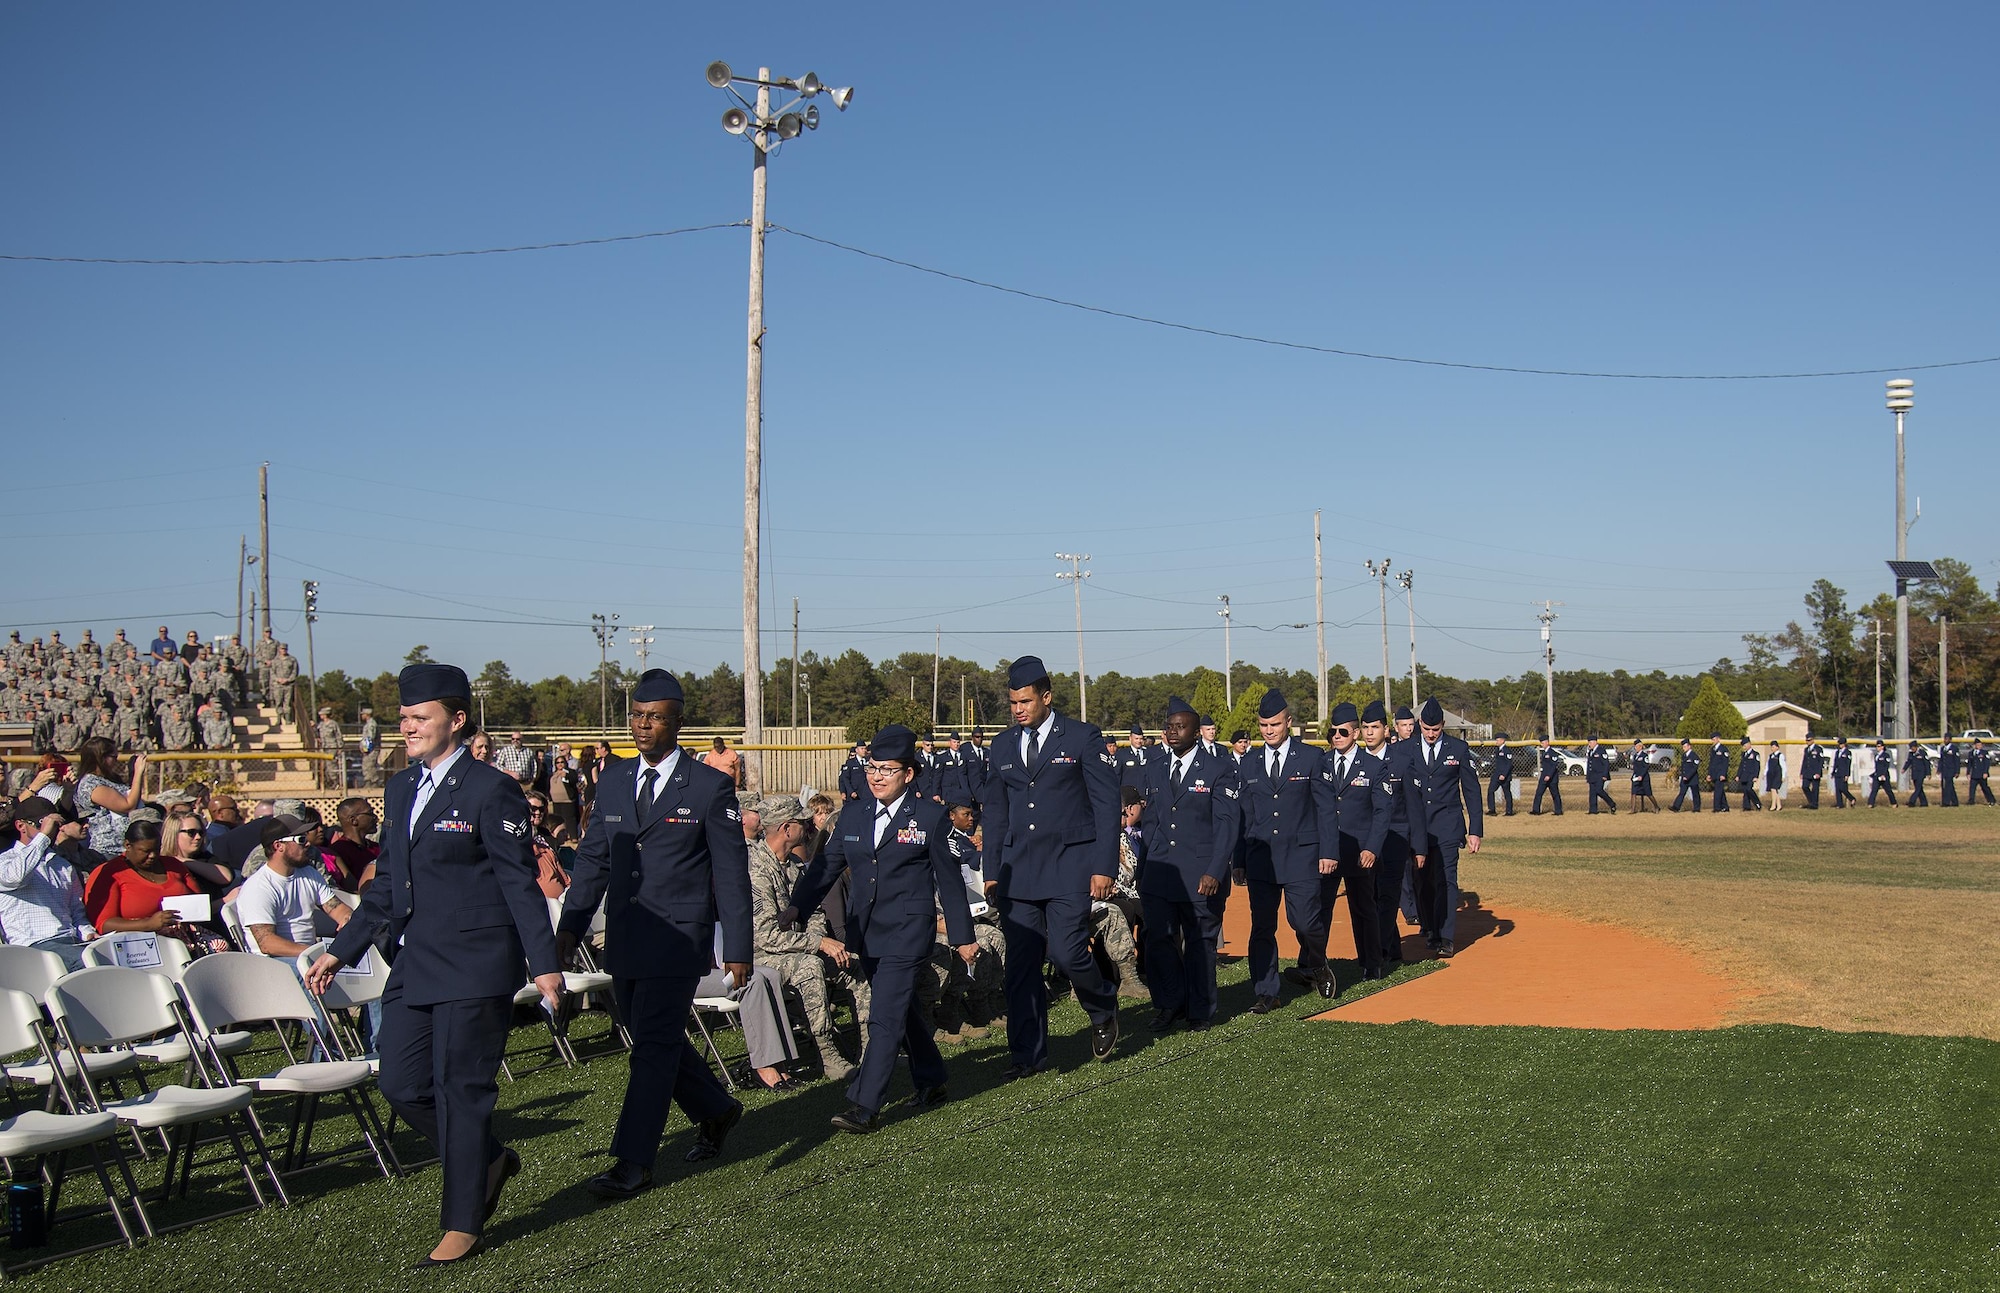 A long line of Airmen in service dress march toward their seats during a Community College of the Air Force graduation ceremony at Eglin Air Force Base, Fla., Nov. 16.  More than 300 Airmen from Eglin and Duke Field were honored at this year’s event. (U.S. Air Force photo/Samuel King Jr.)